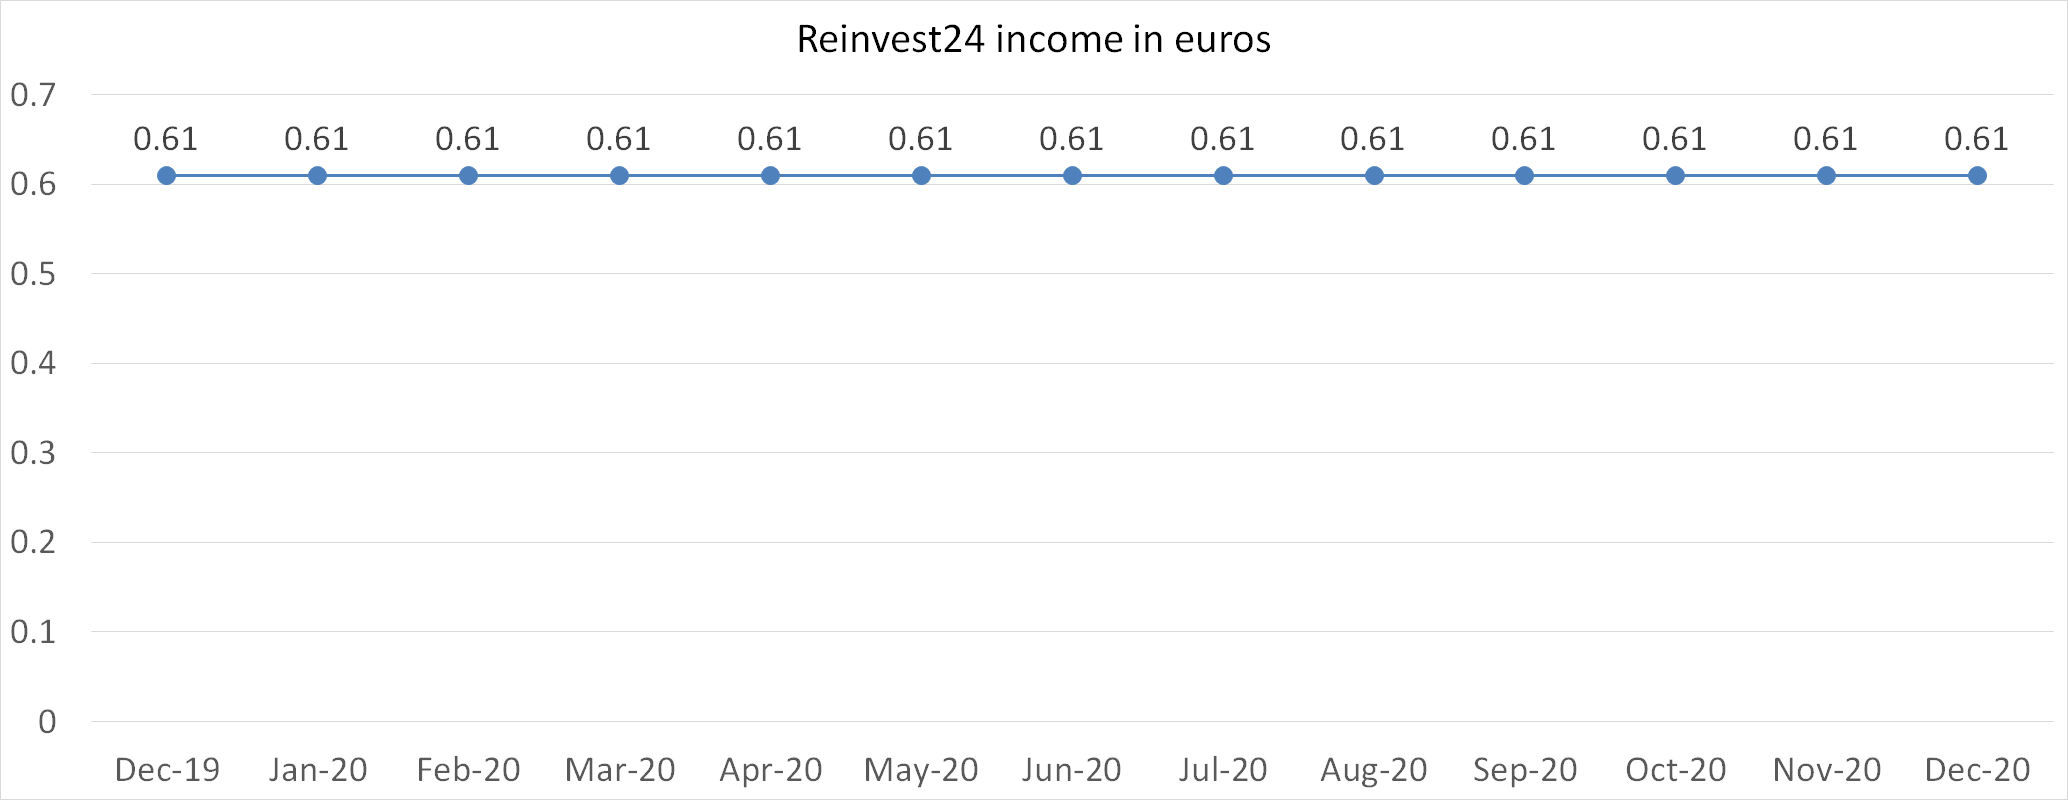 Reinvest24 income in euros december 2020